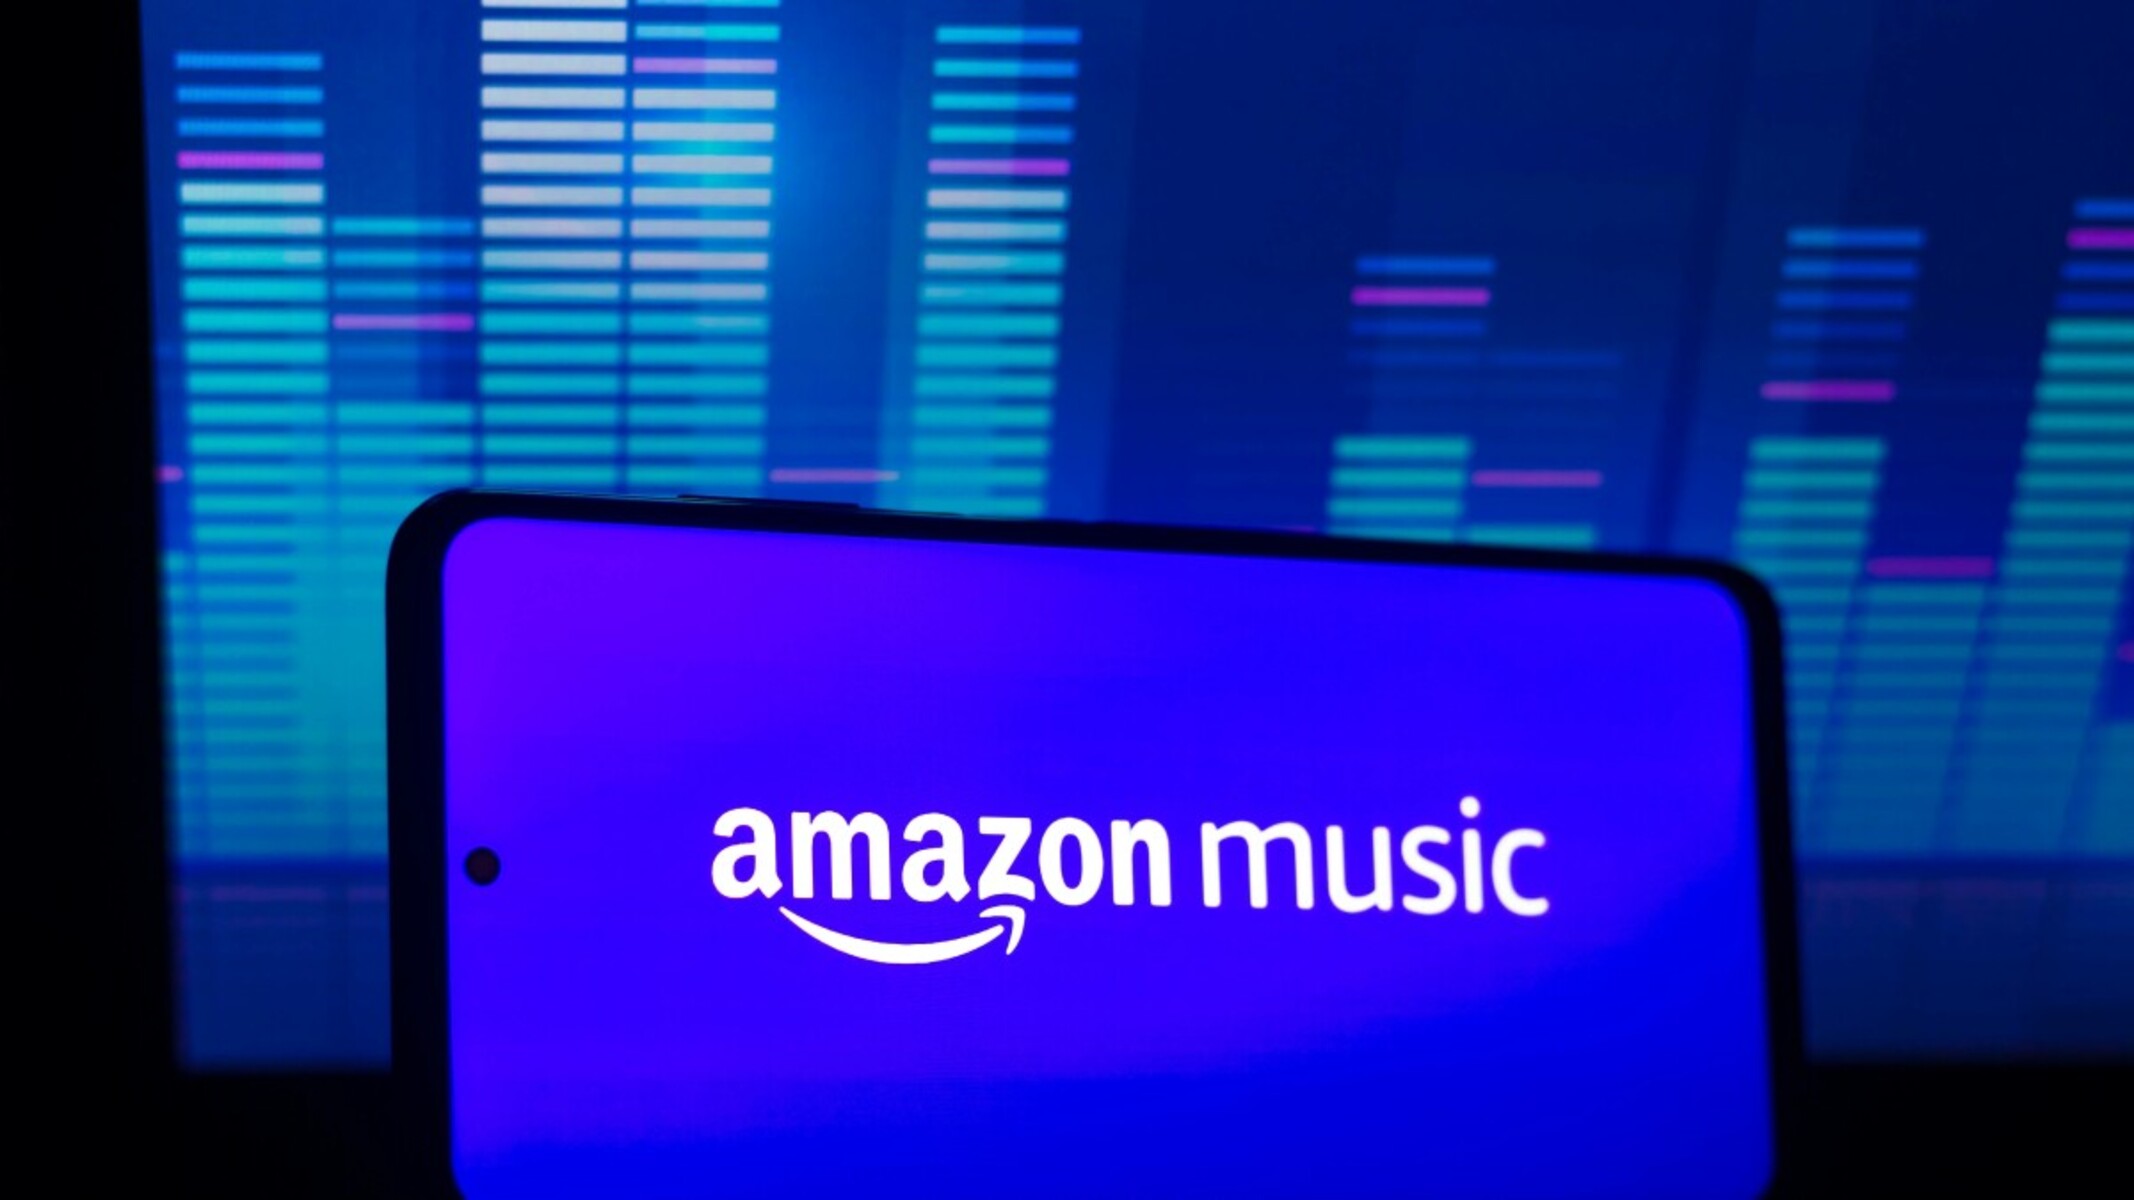 Amazon Music Unlimited: Frequently Asked Questions